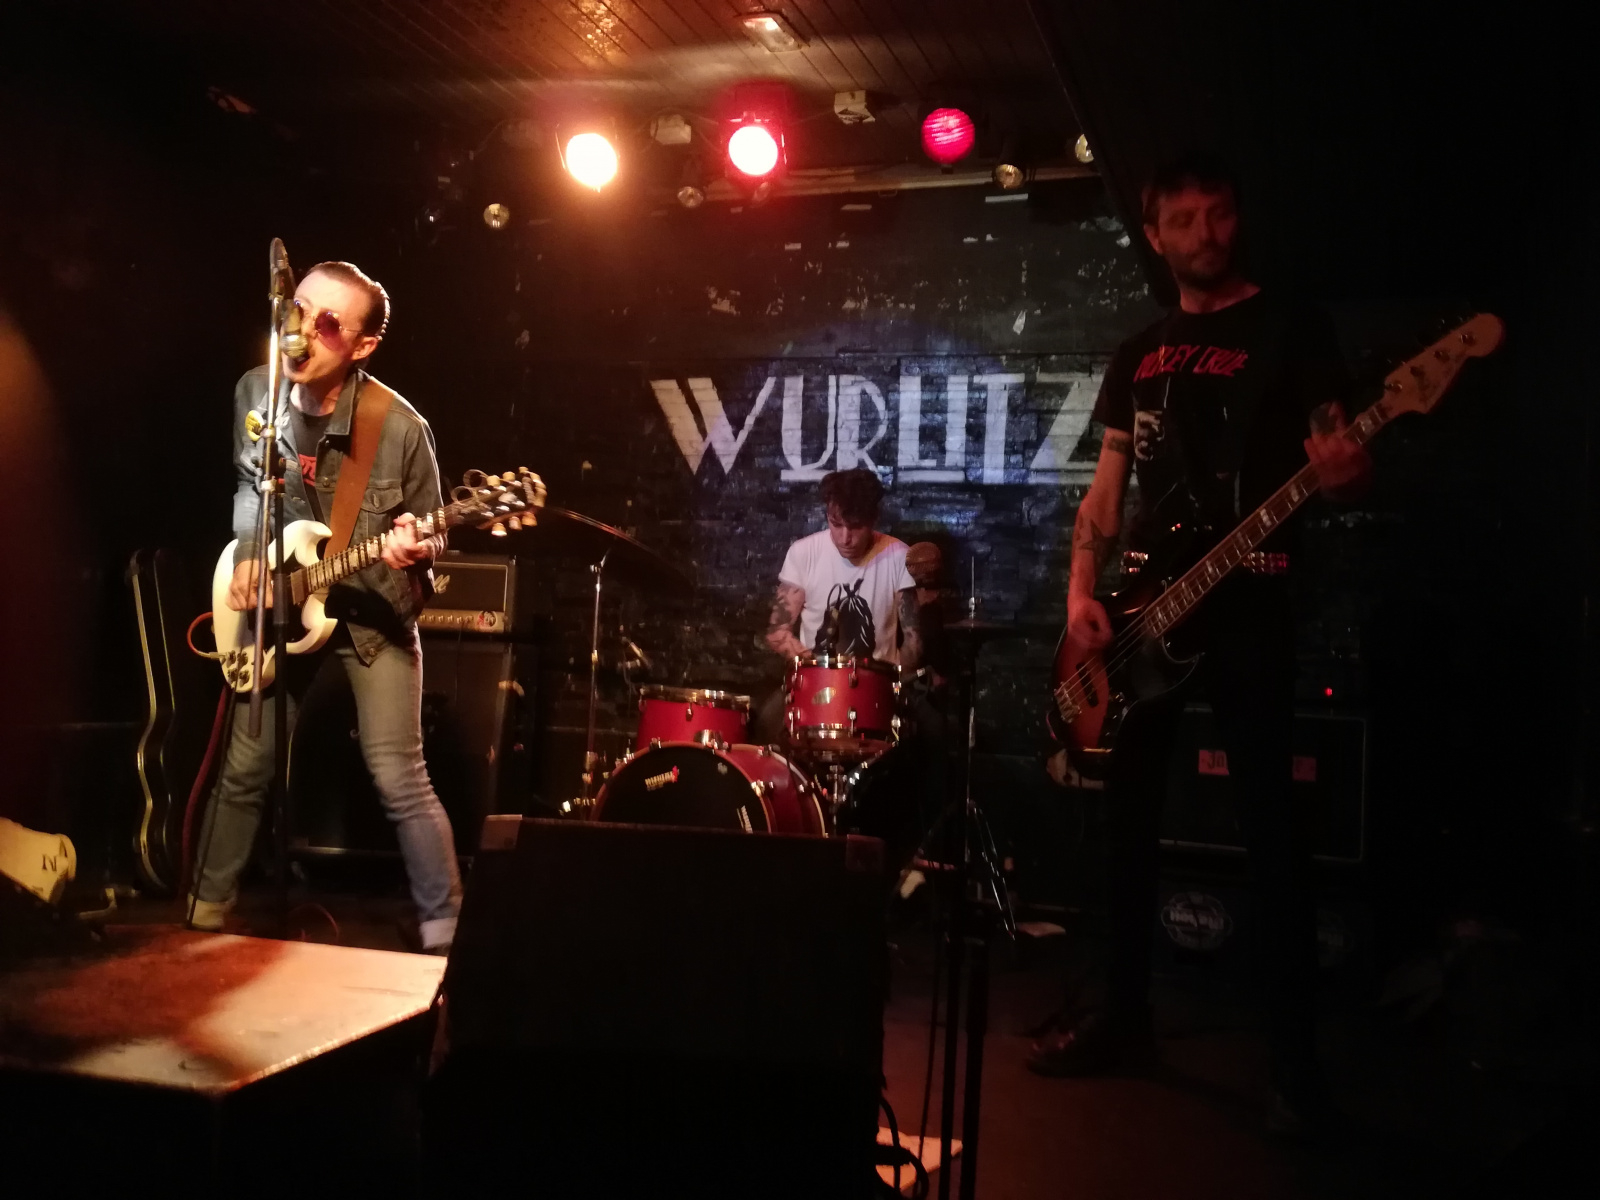 Live music in Madrid: Rock band performing on stage at Wurlitzer Ballroom, Madrid